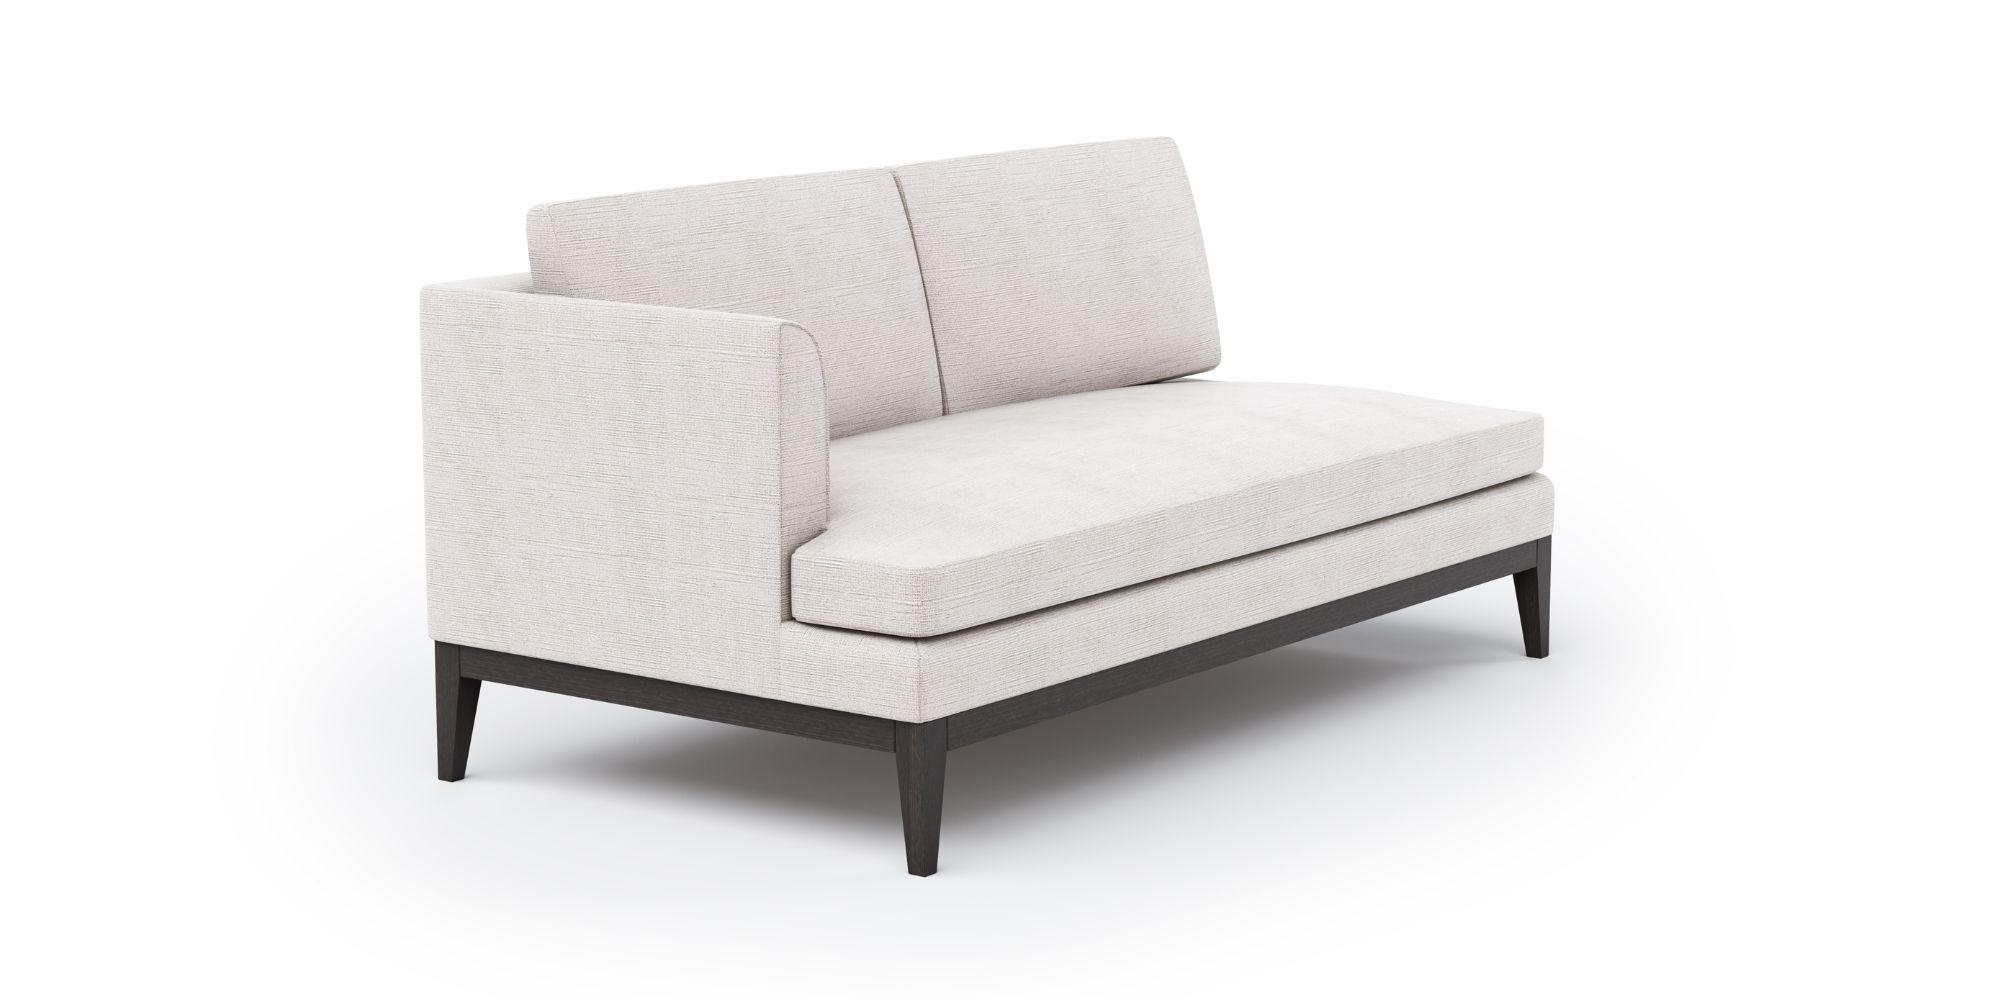 Chuchumber Left Arm Chaise in Outdoor Modular Sofas for Chuchumber collection